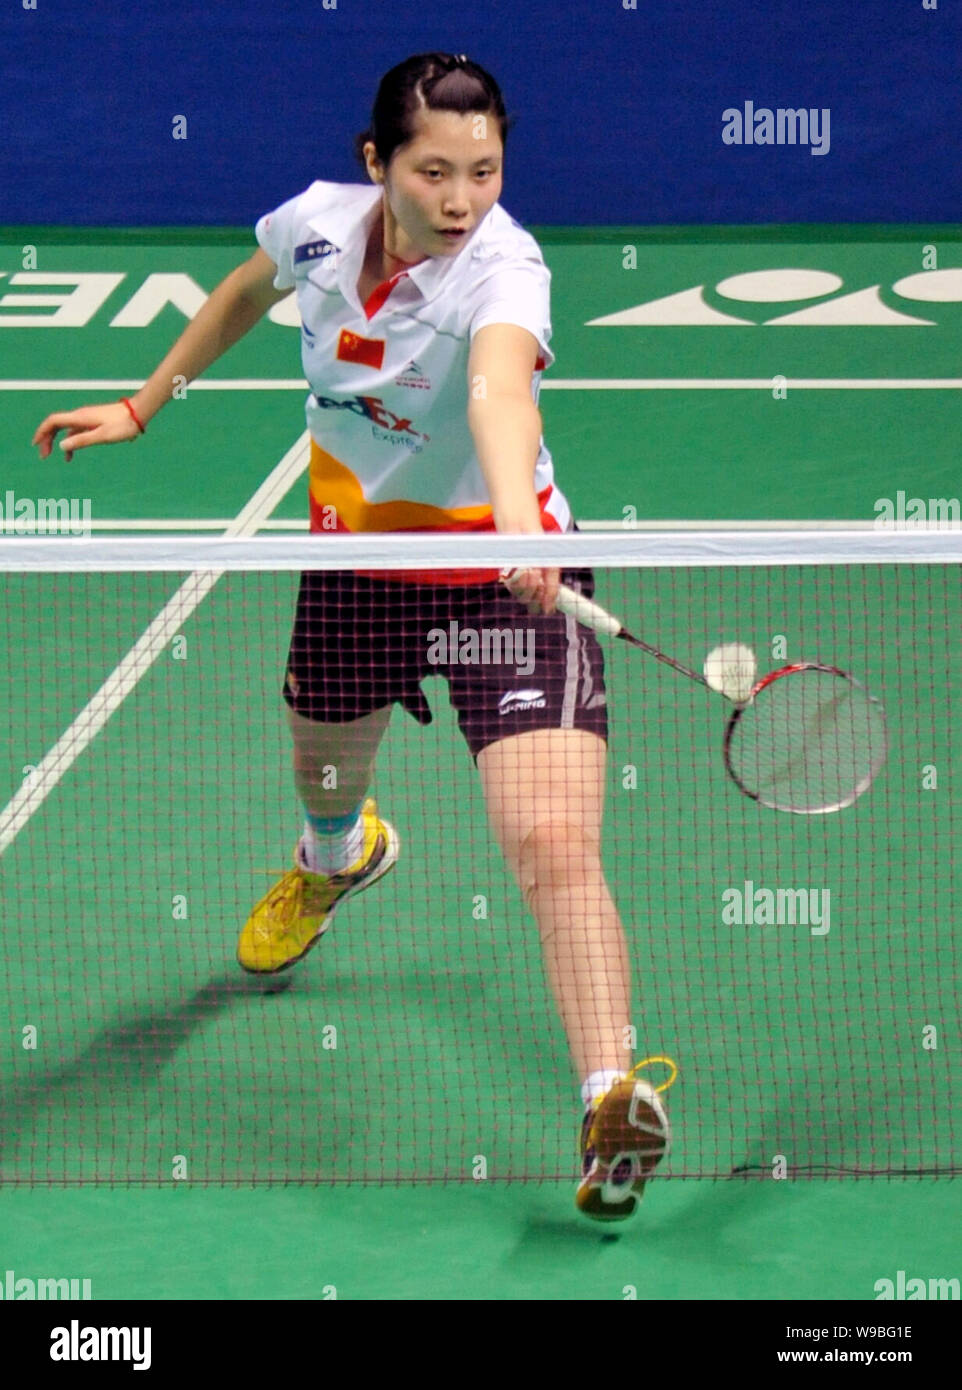 Chinas Jiang Yanjiao competes in the final of the womens singles at the China Open Badminton Championships 2010 in Shanghai, China, December 5, 2010. Stock Photo